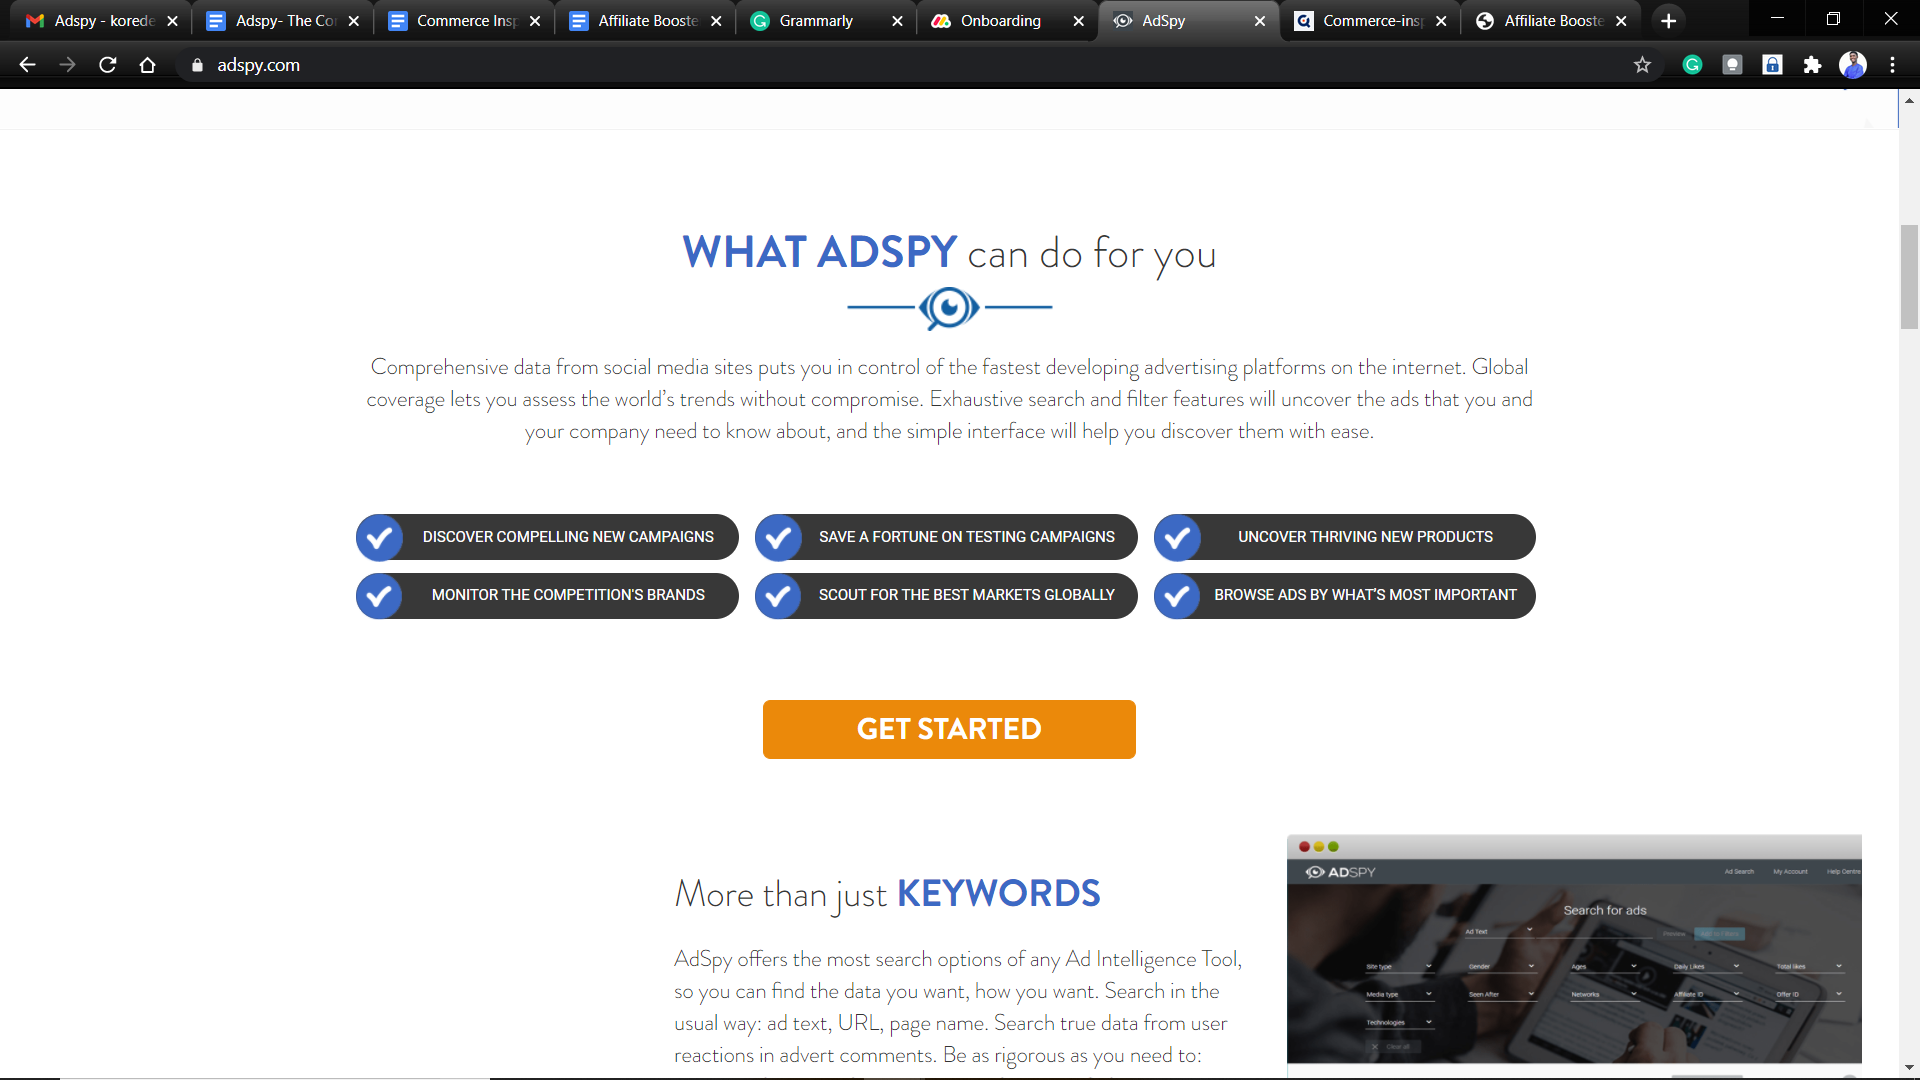 How Does Adspy Work?